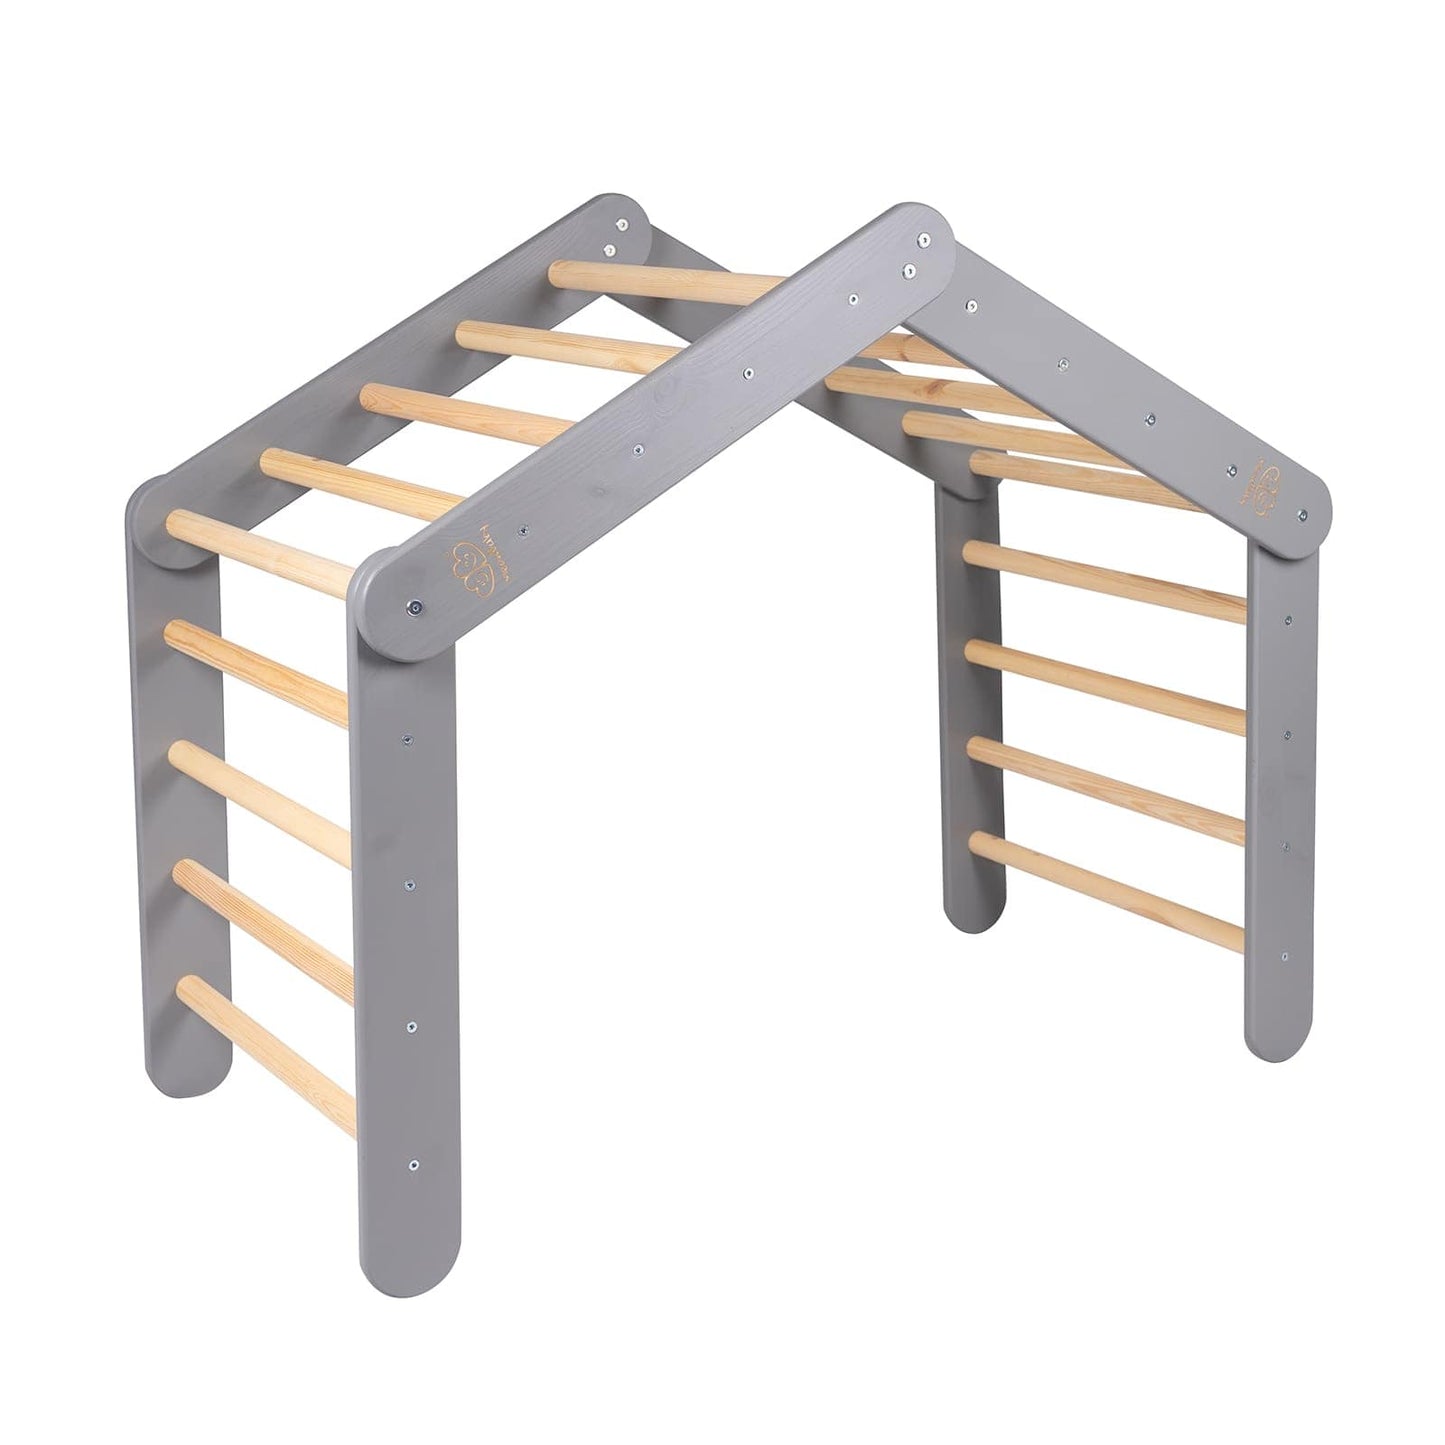 Folding Large Play House With Ladder For Kids By MeowBaby - Stylemykid.com